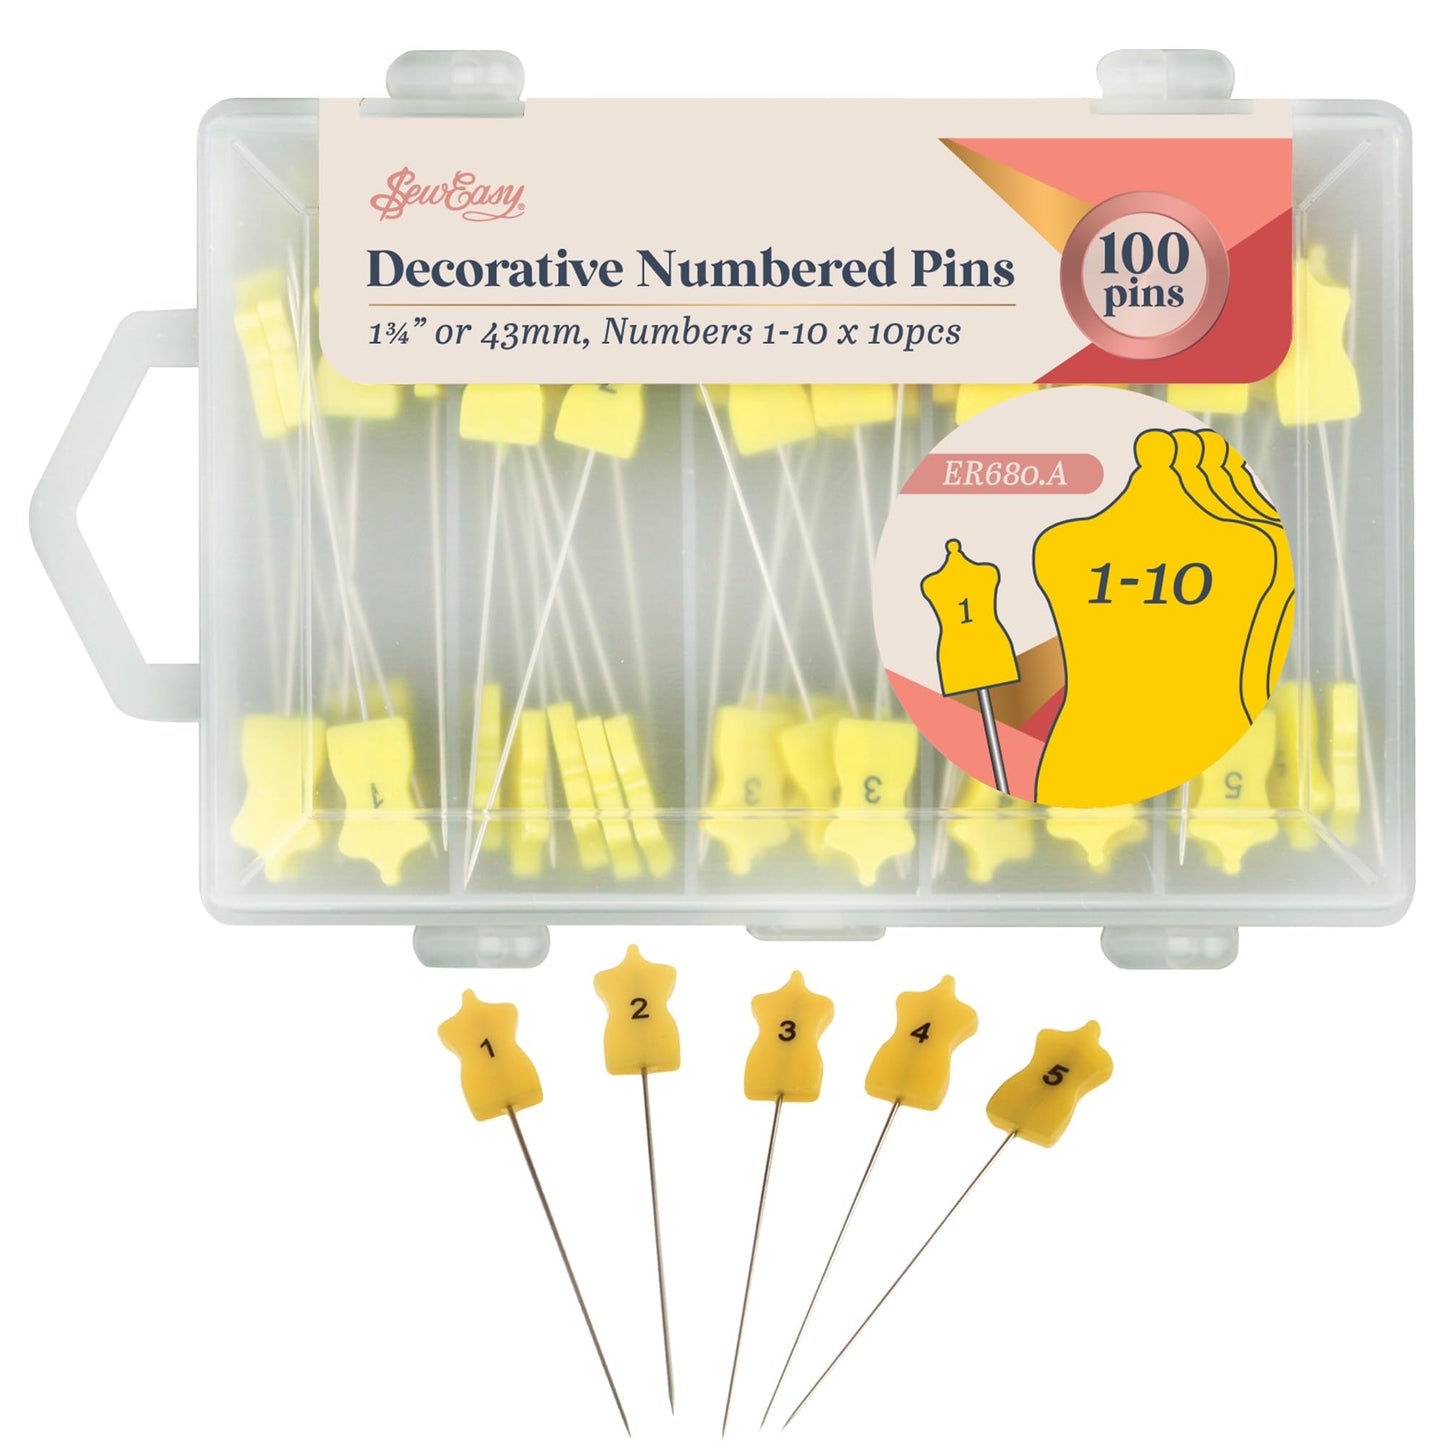 Sew Easy Decorative Numbered Pins